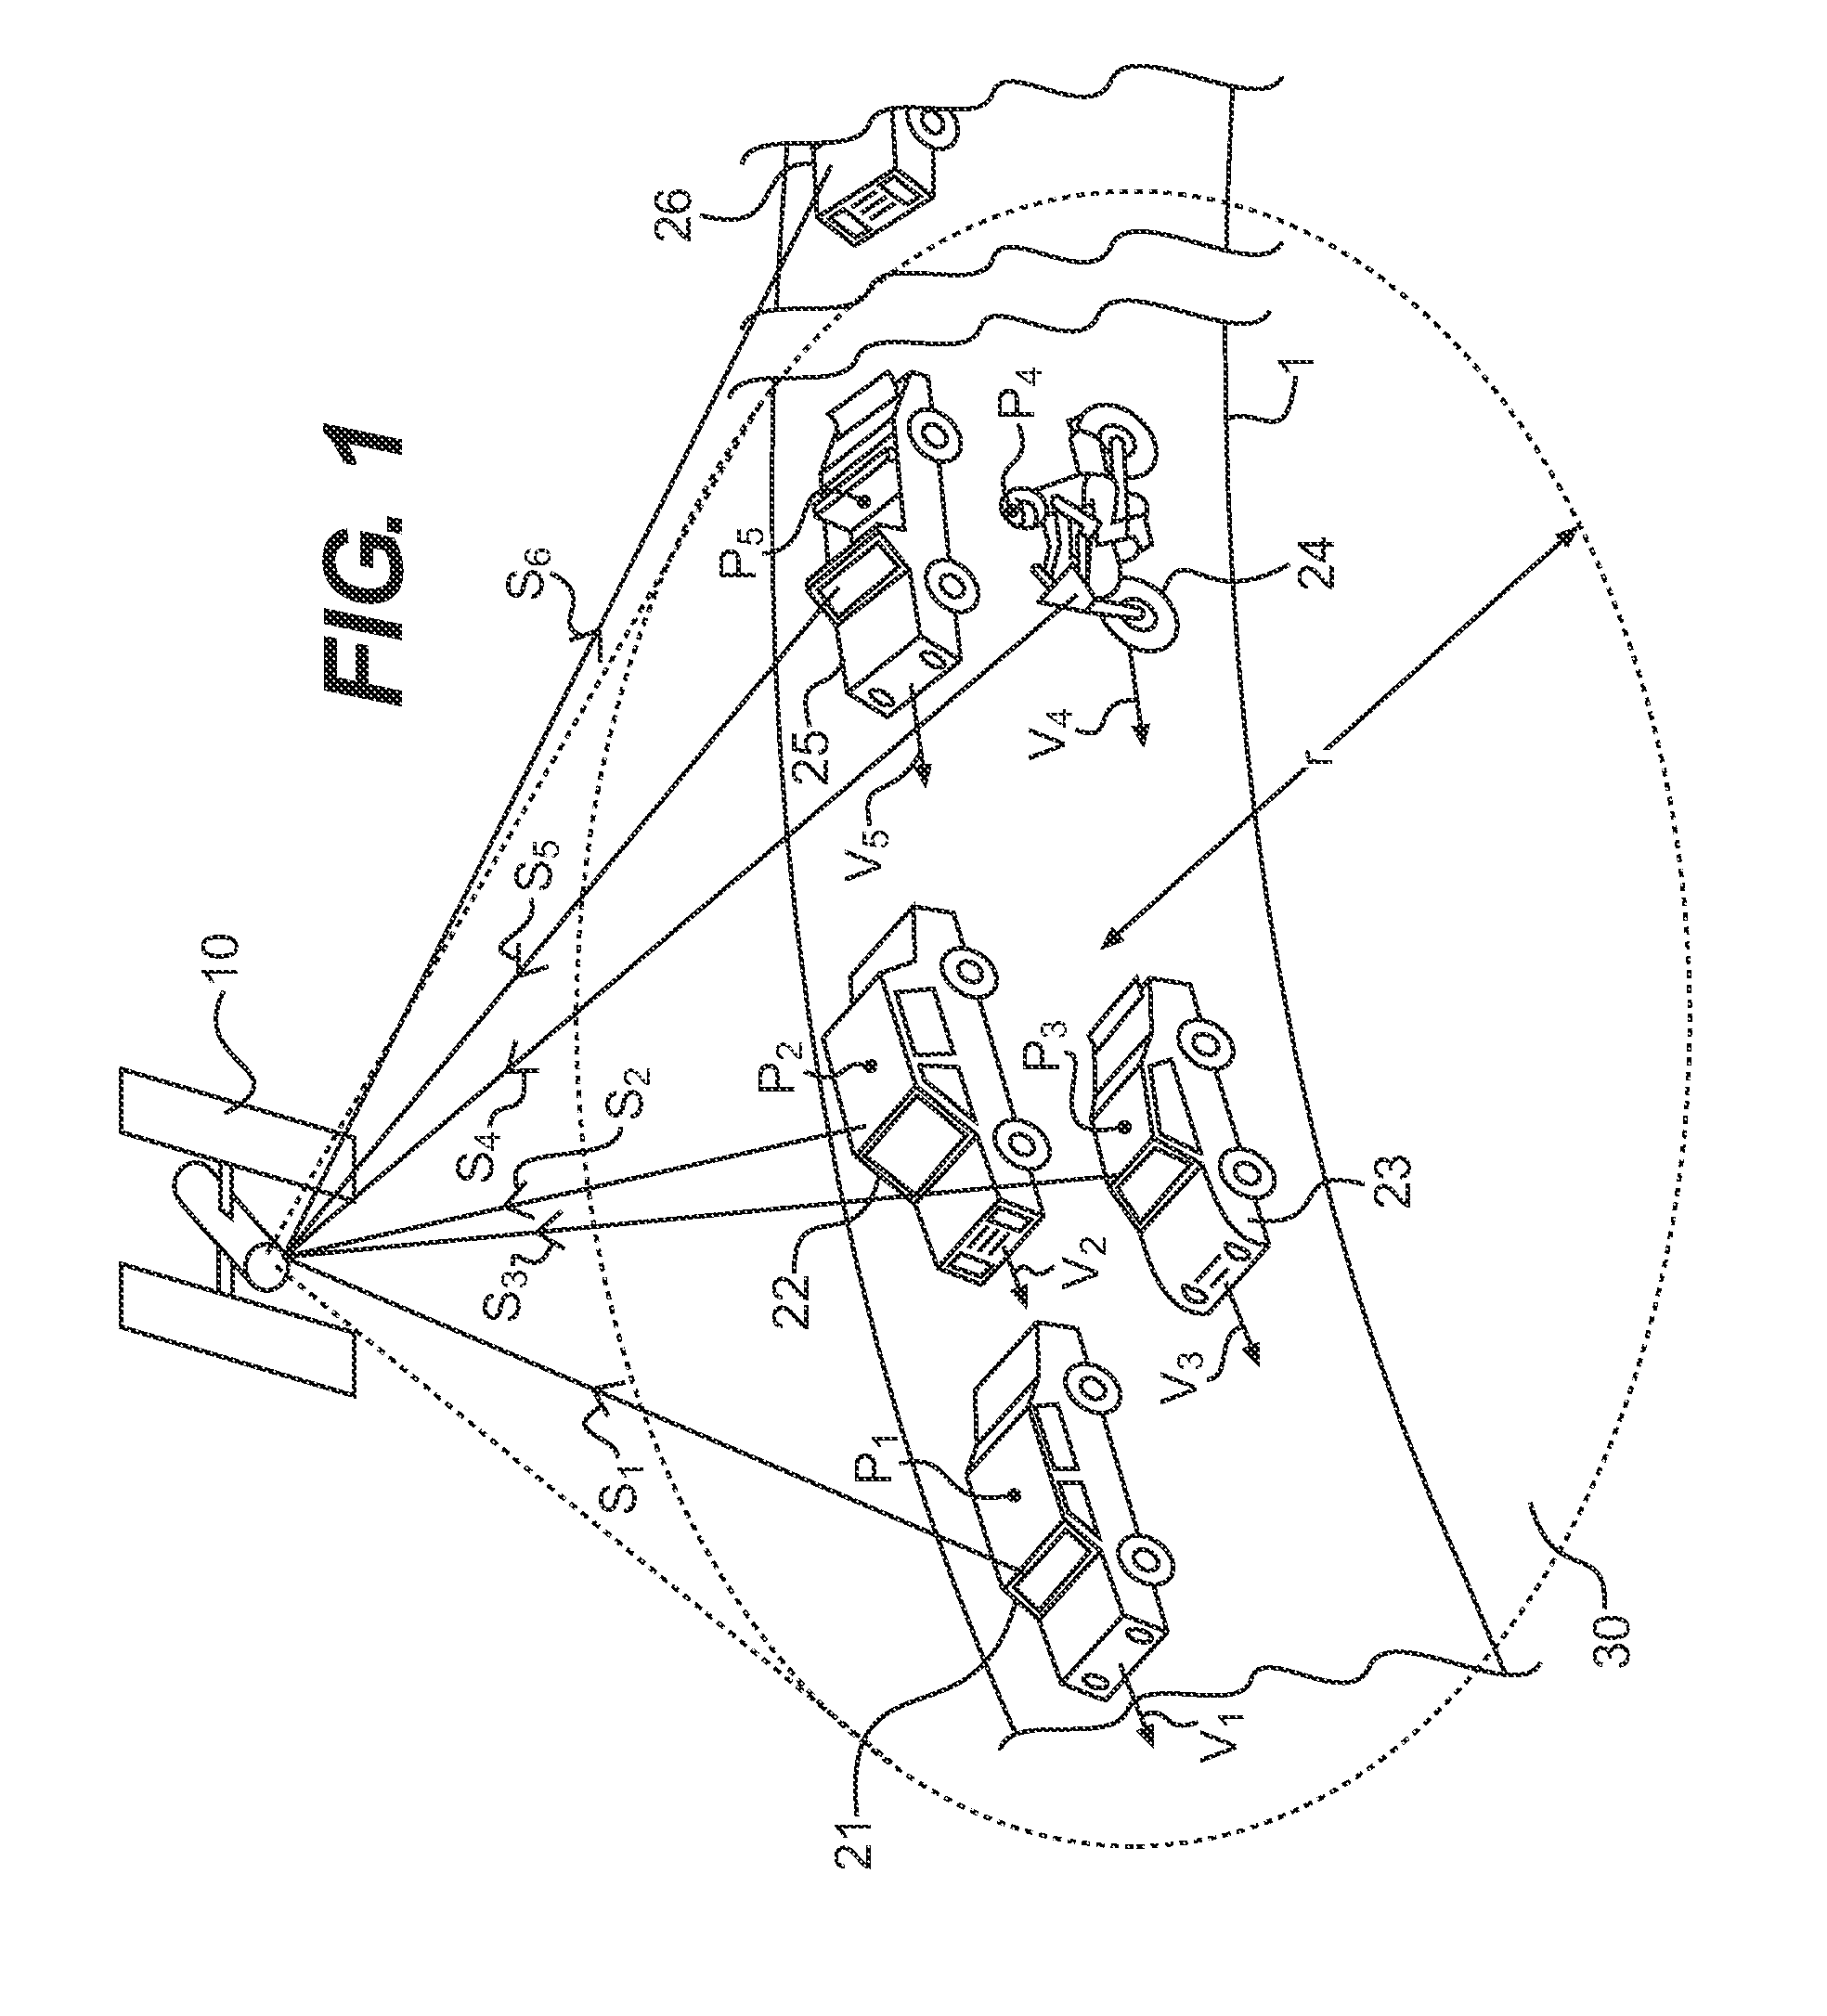 Device for navigating a motor vehicle and a method of navigating the same